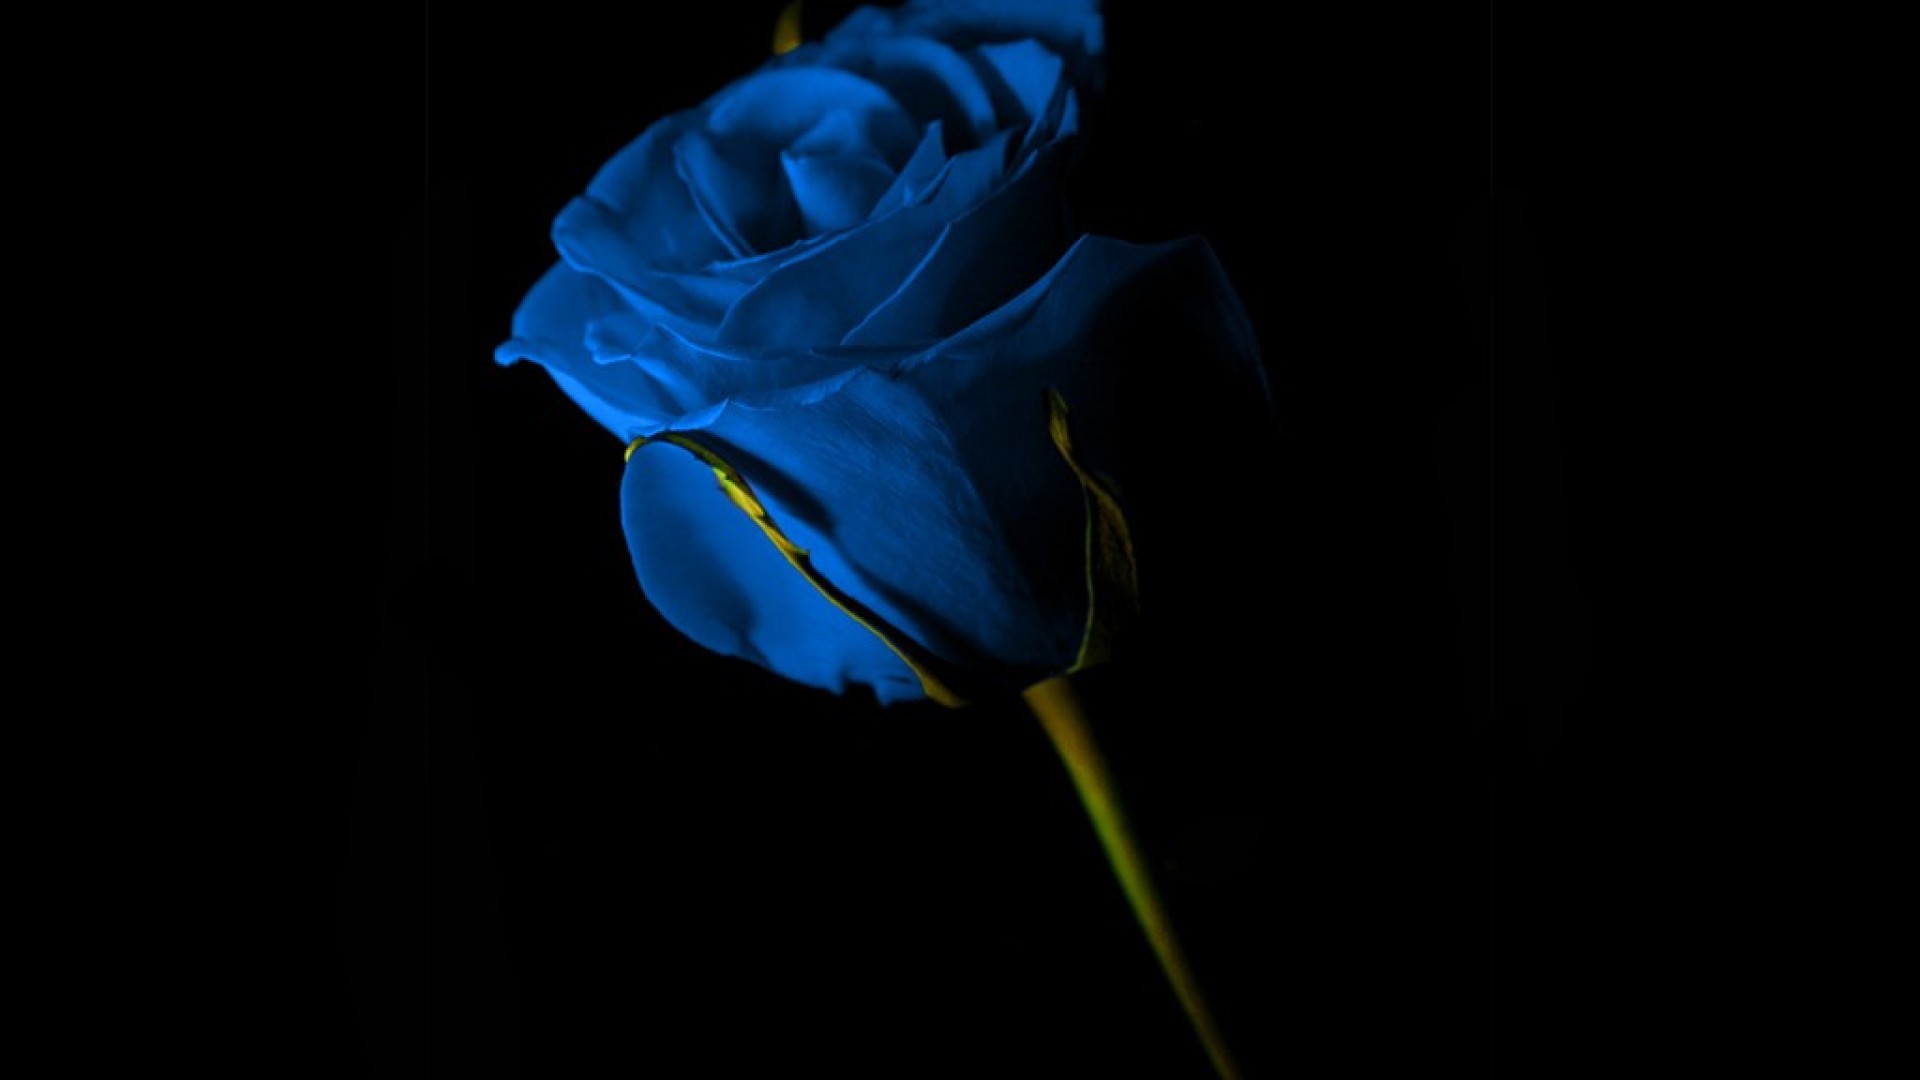 Blue rose on black background wallpapers and images   wallpapers